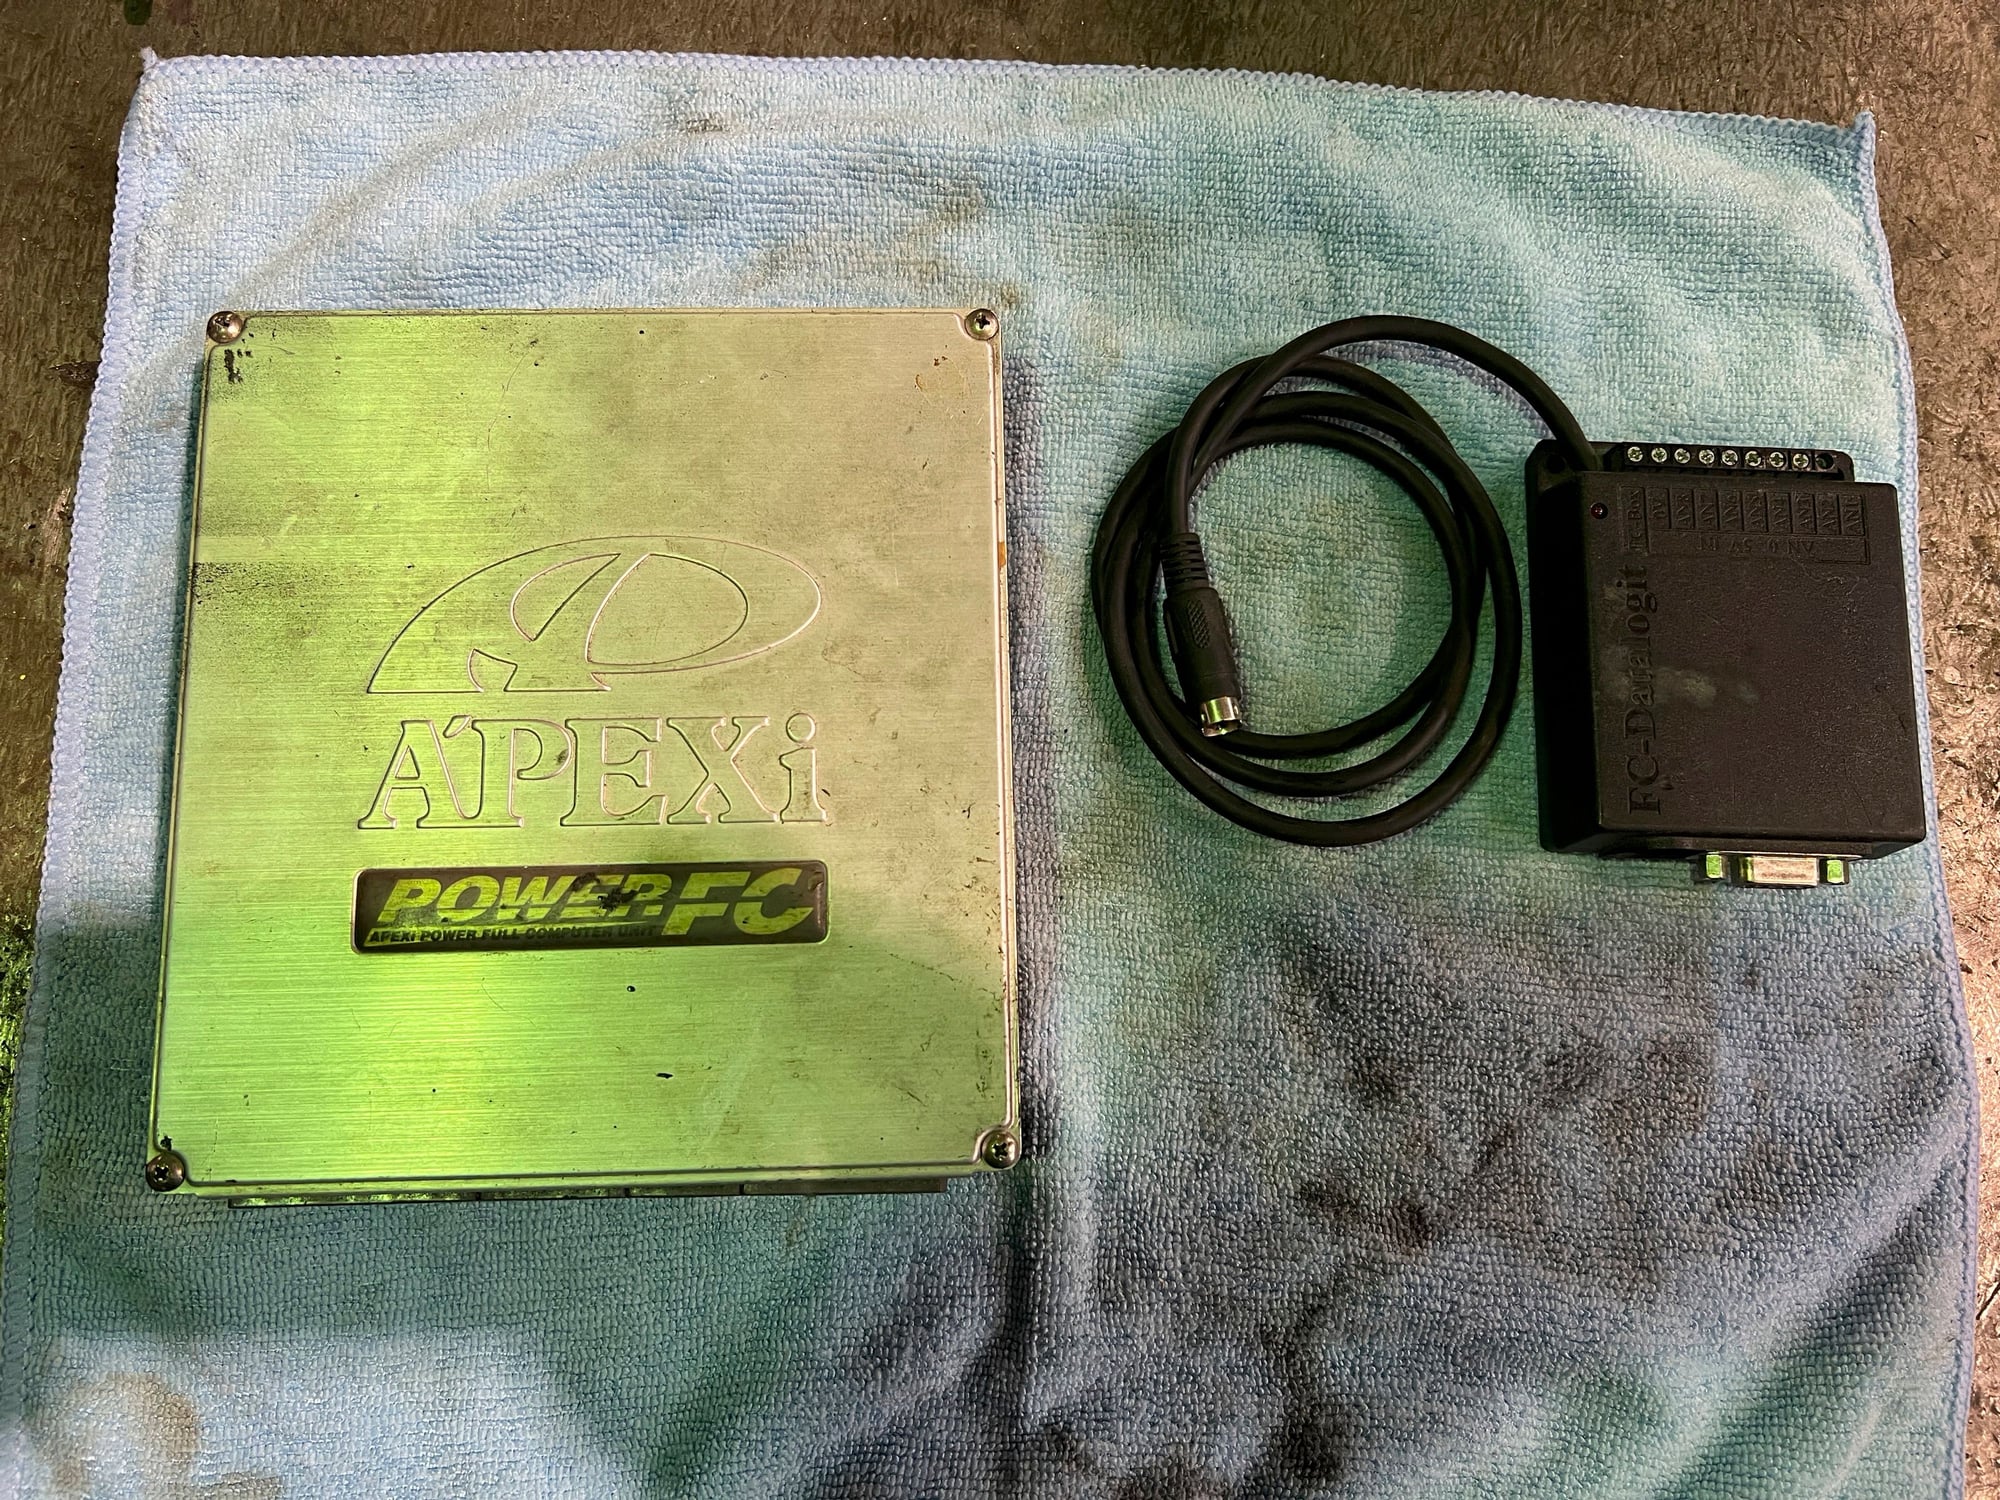 Engine - Electrical - Power-FC w/ Datalogit - Used - 0  All Models - Martinsville, VA 24112, United States